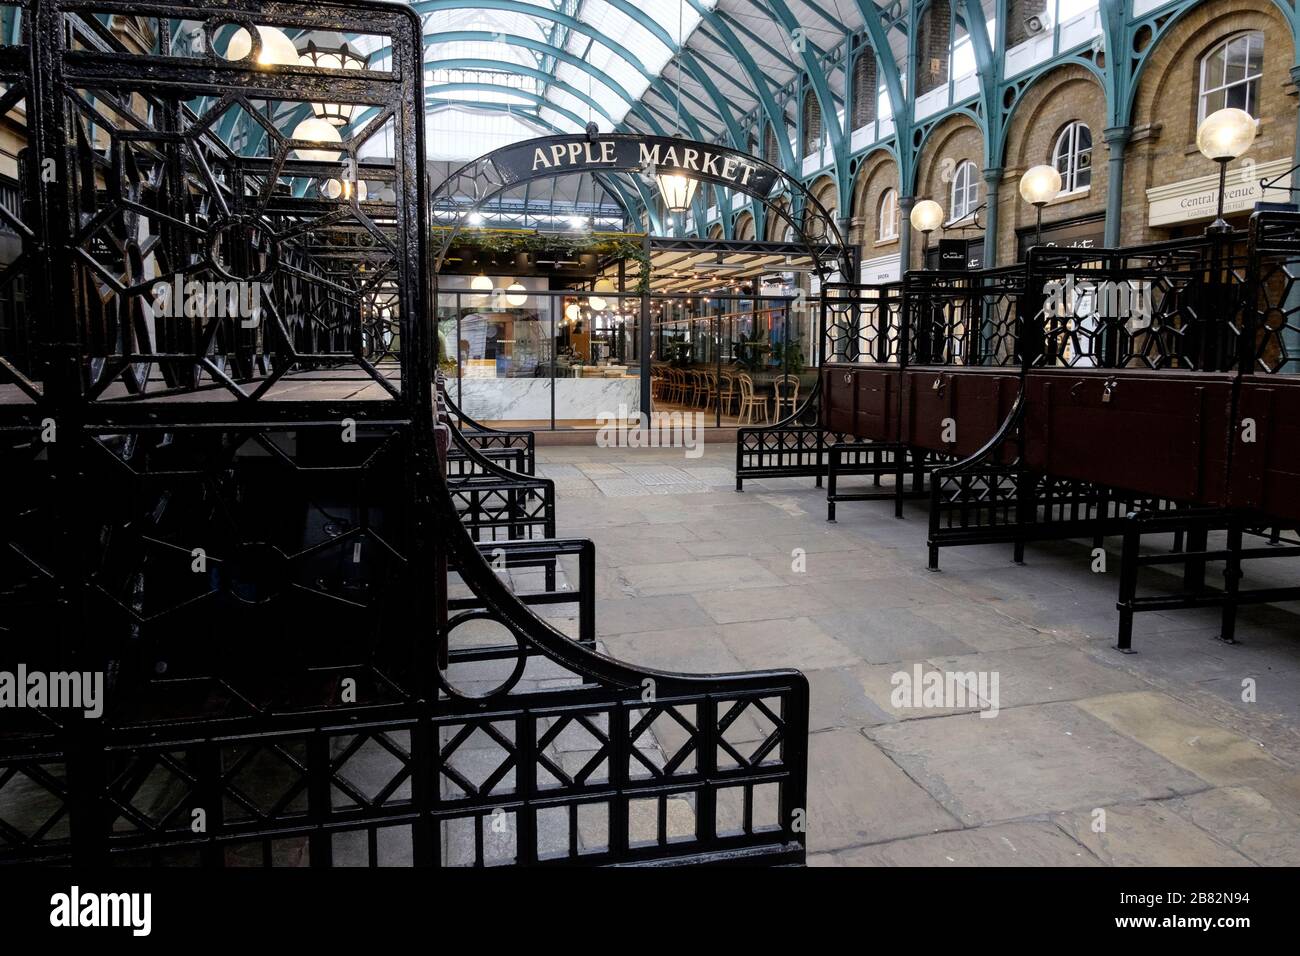 London, UK. 19 March 2020. Apple Market, normally a busy daily market selling hand-made craft and design items, popular with tourists, is completely deserted. Stock Photo